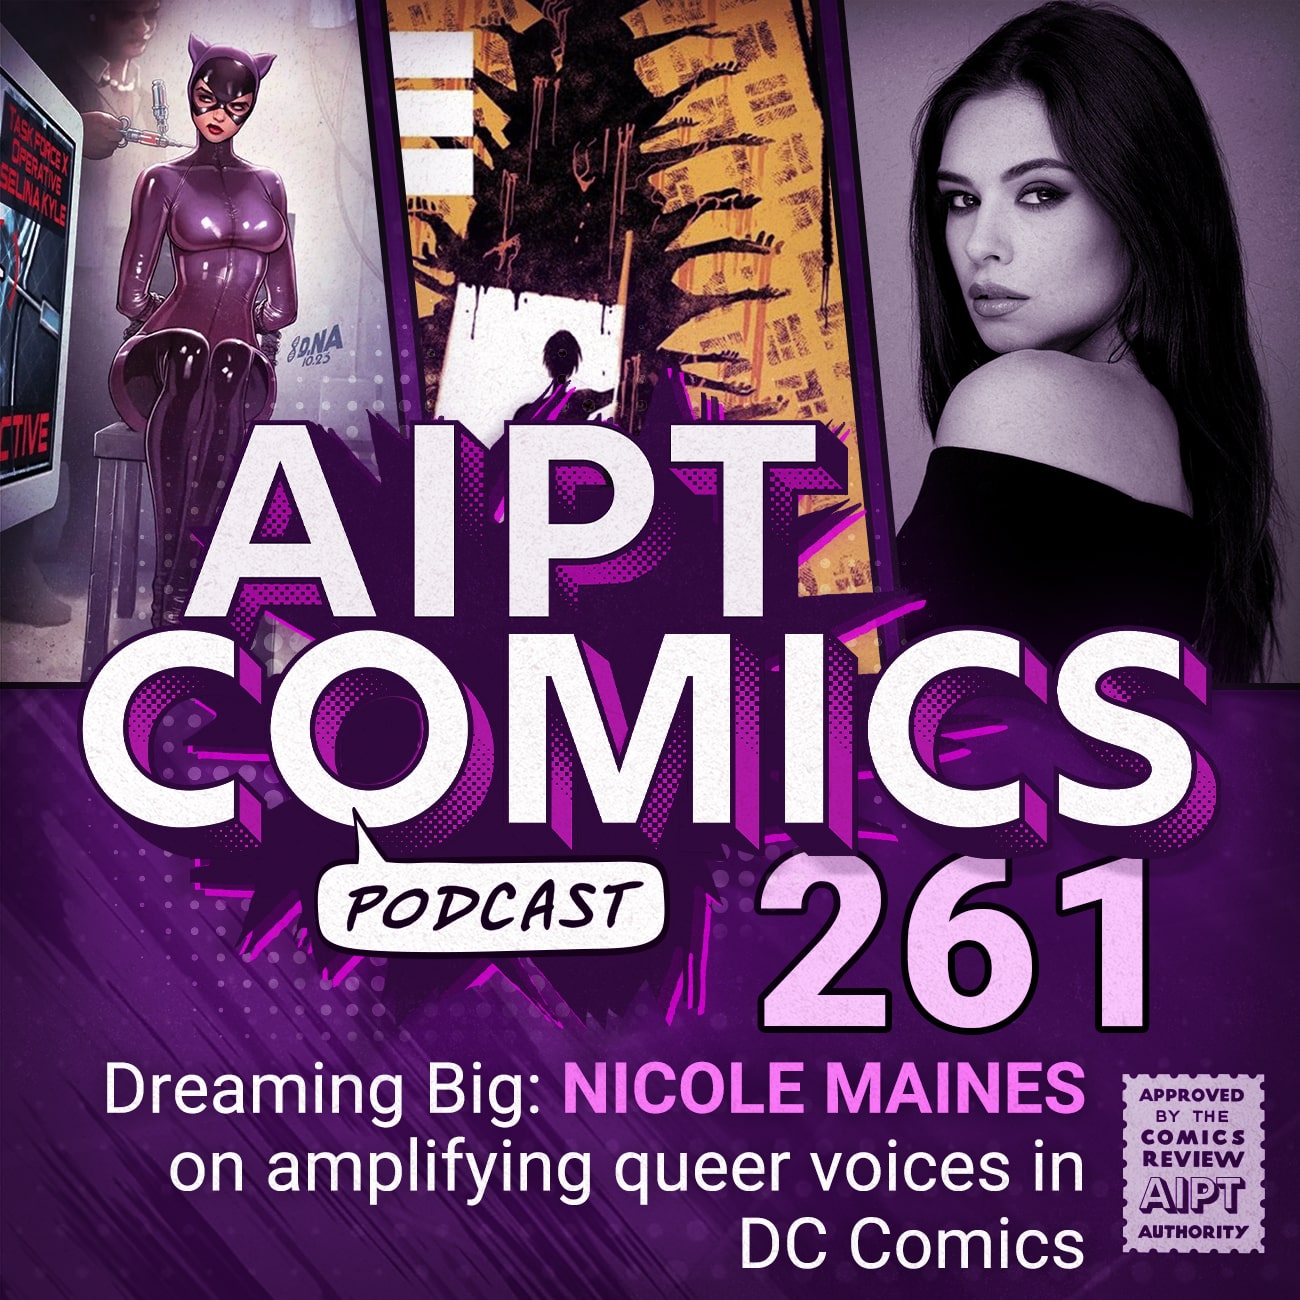 AIPT Comics Podcast Episode 261: Dreaming Big: Nicole Maines on amplifying queer voices in DC Comics